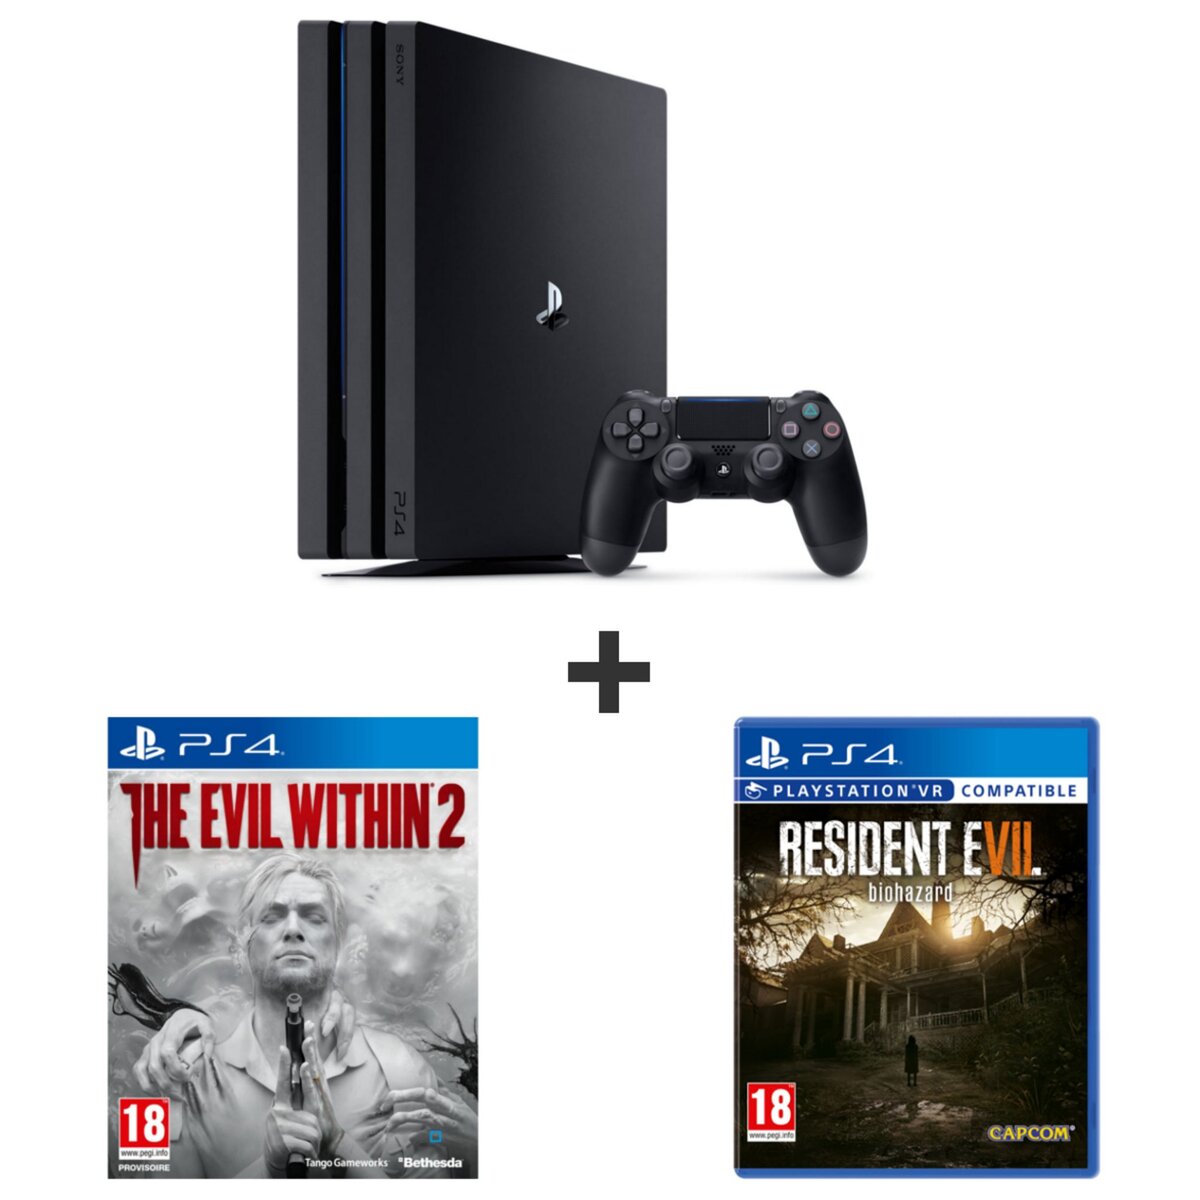 EXCLU WEB Console PS4 PRO 1 TO + The Evil Within 2 + Resident Evil 7